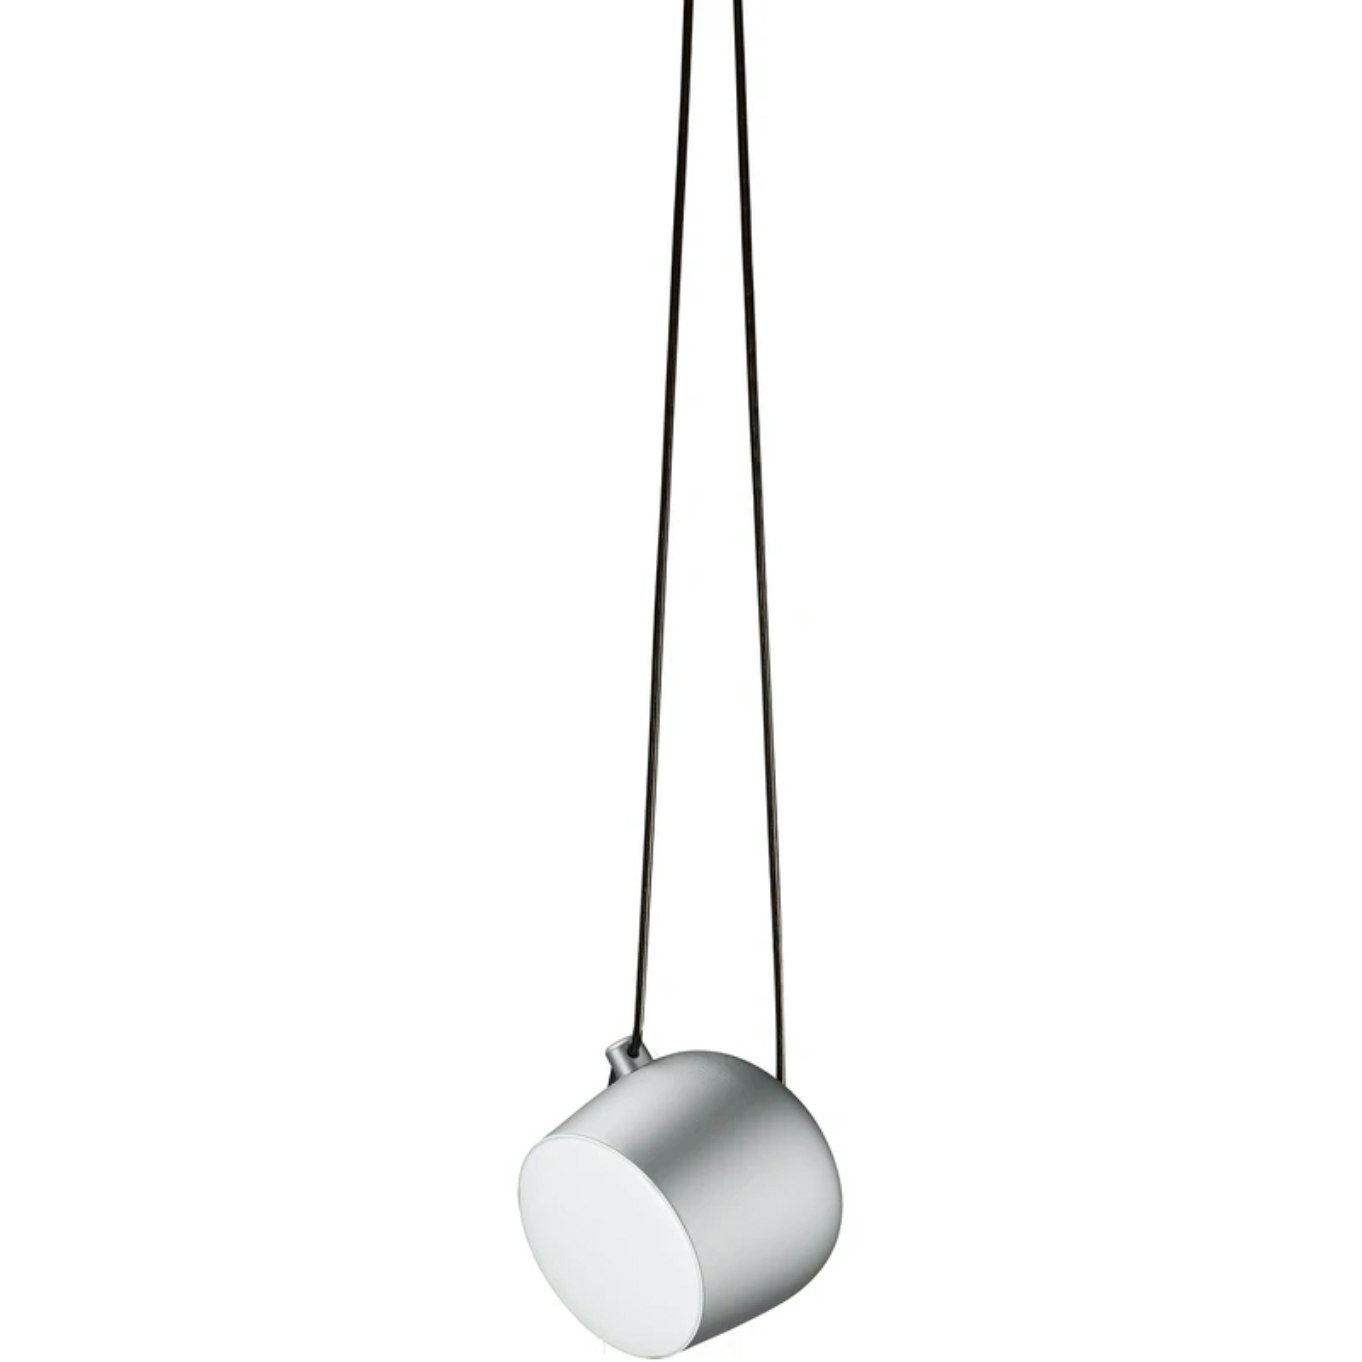 Aim Small Hanglamp, Light Silver Anodized